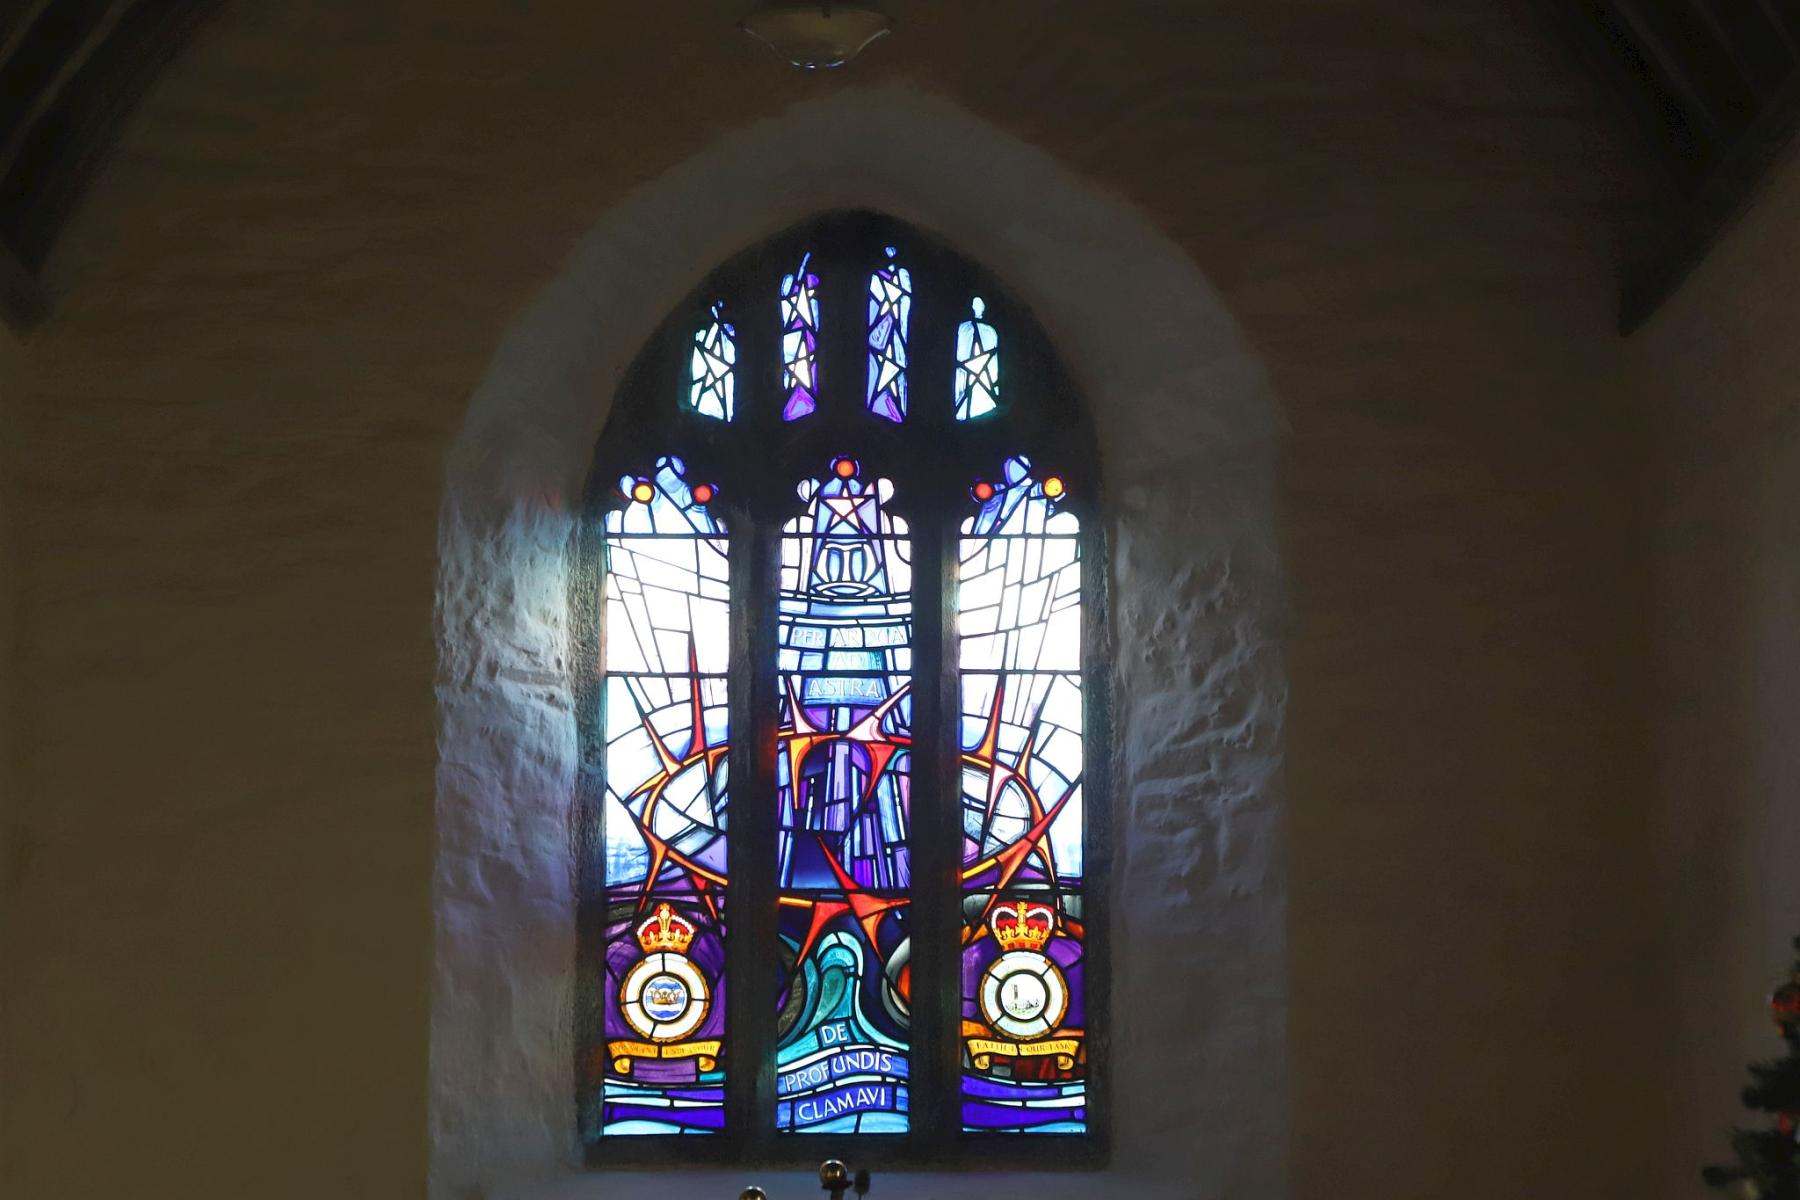 1989 RAF memorial stained glass window at St. Eval Parish Church near Newquay in Cornwall